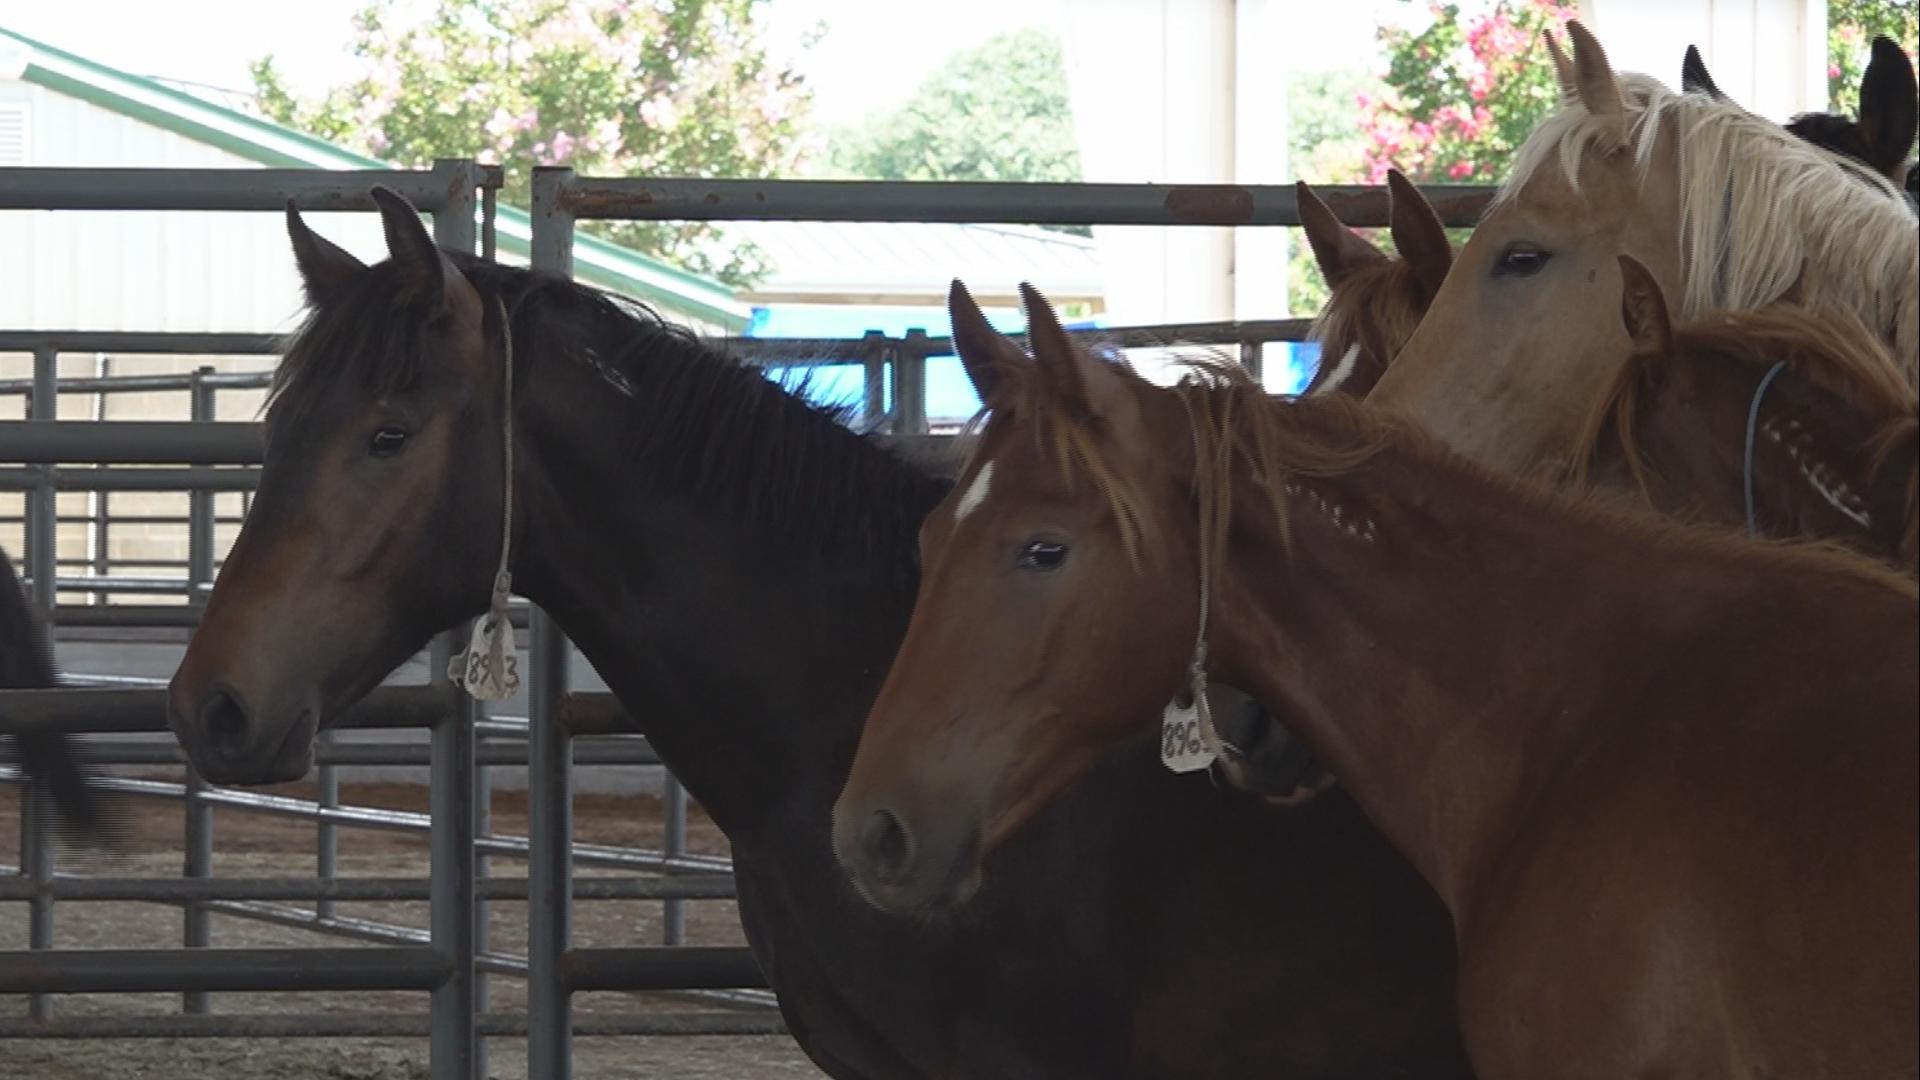 More than 100 horses and burros are available for adoption over the three-day period.